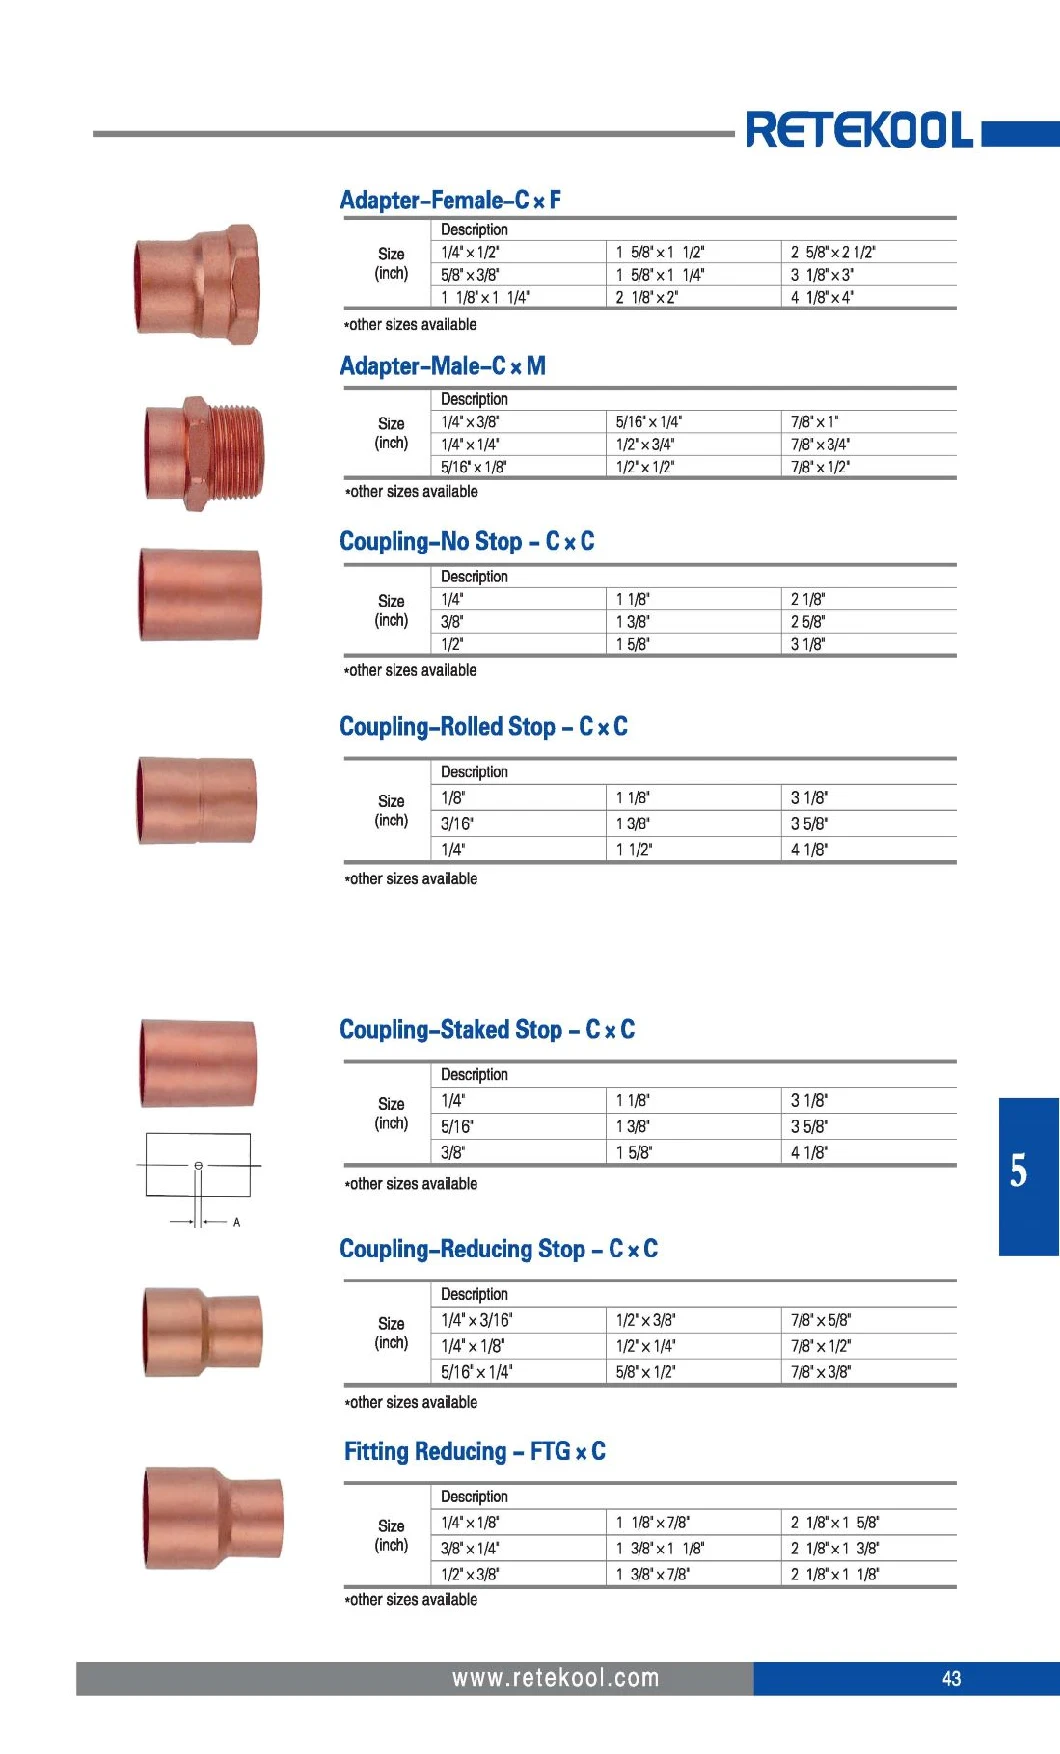 Copper Fittings Pipe Ftting Reducing Tees